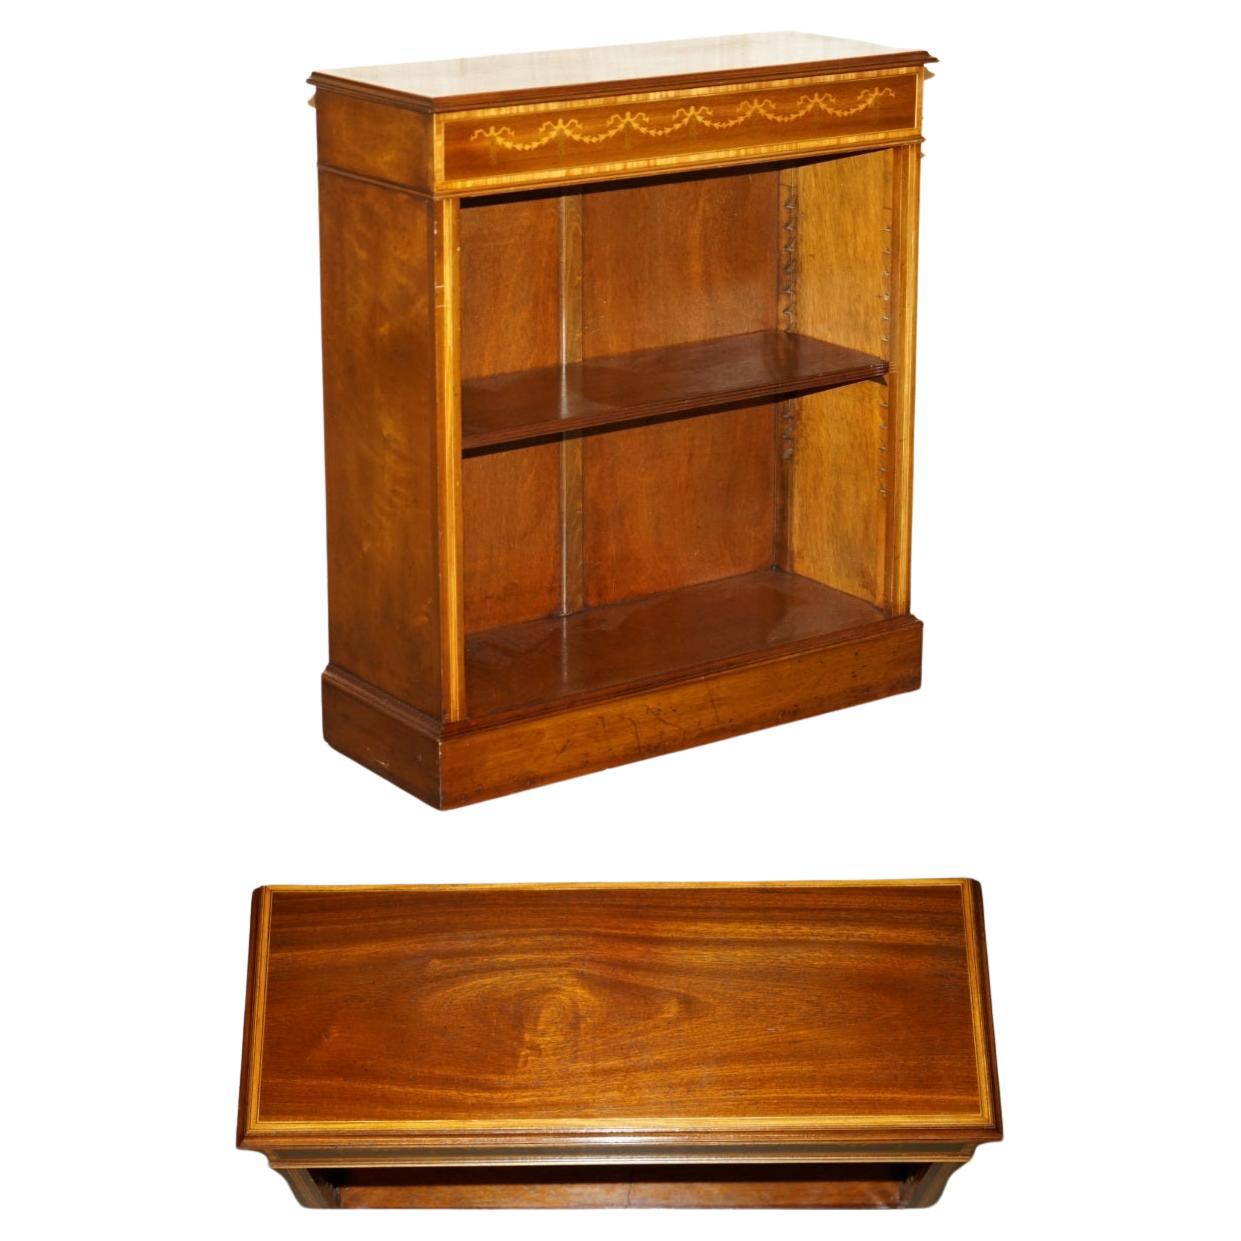 EXQUISITELY INLAID BRiGHTS OF NETTLEBED SHERATON REVIVAL DWARF OPEN BOOKCASE For Sale